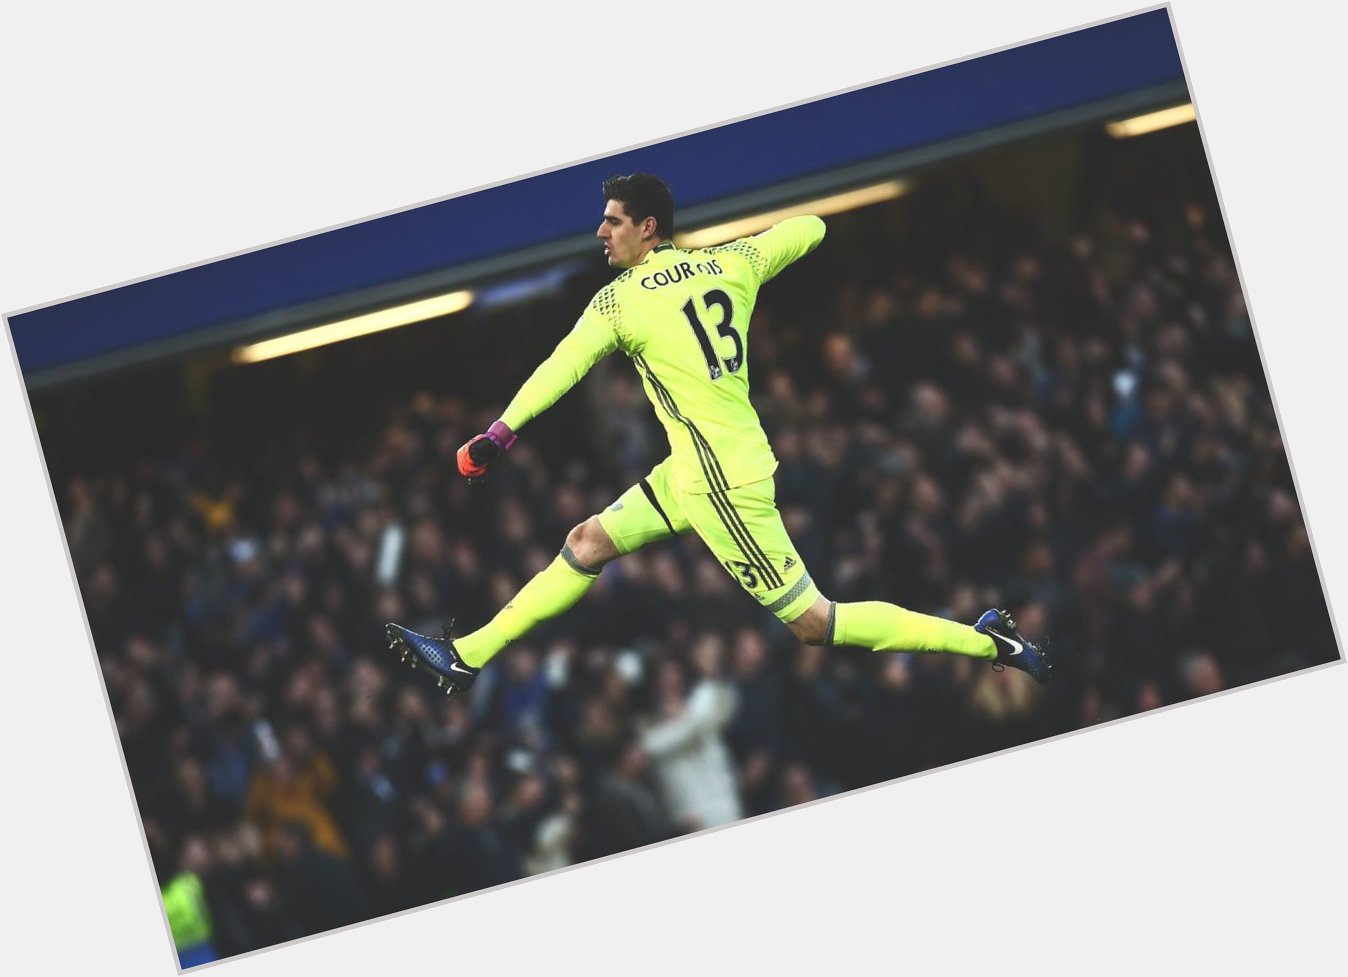 Wishing Chelsea goalkeeper Thibaut Courtois a very happy 26th birthday.

He\s already kept 170 career clean sheets. 